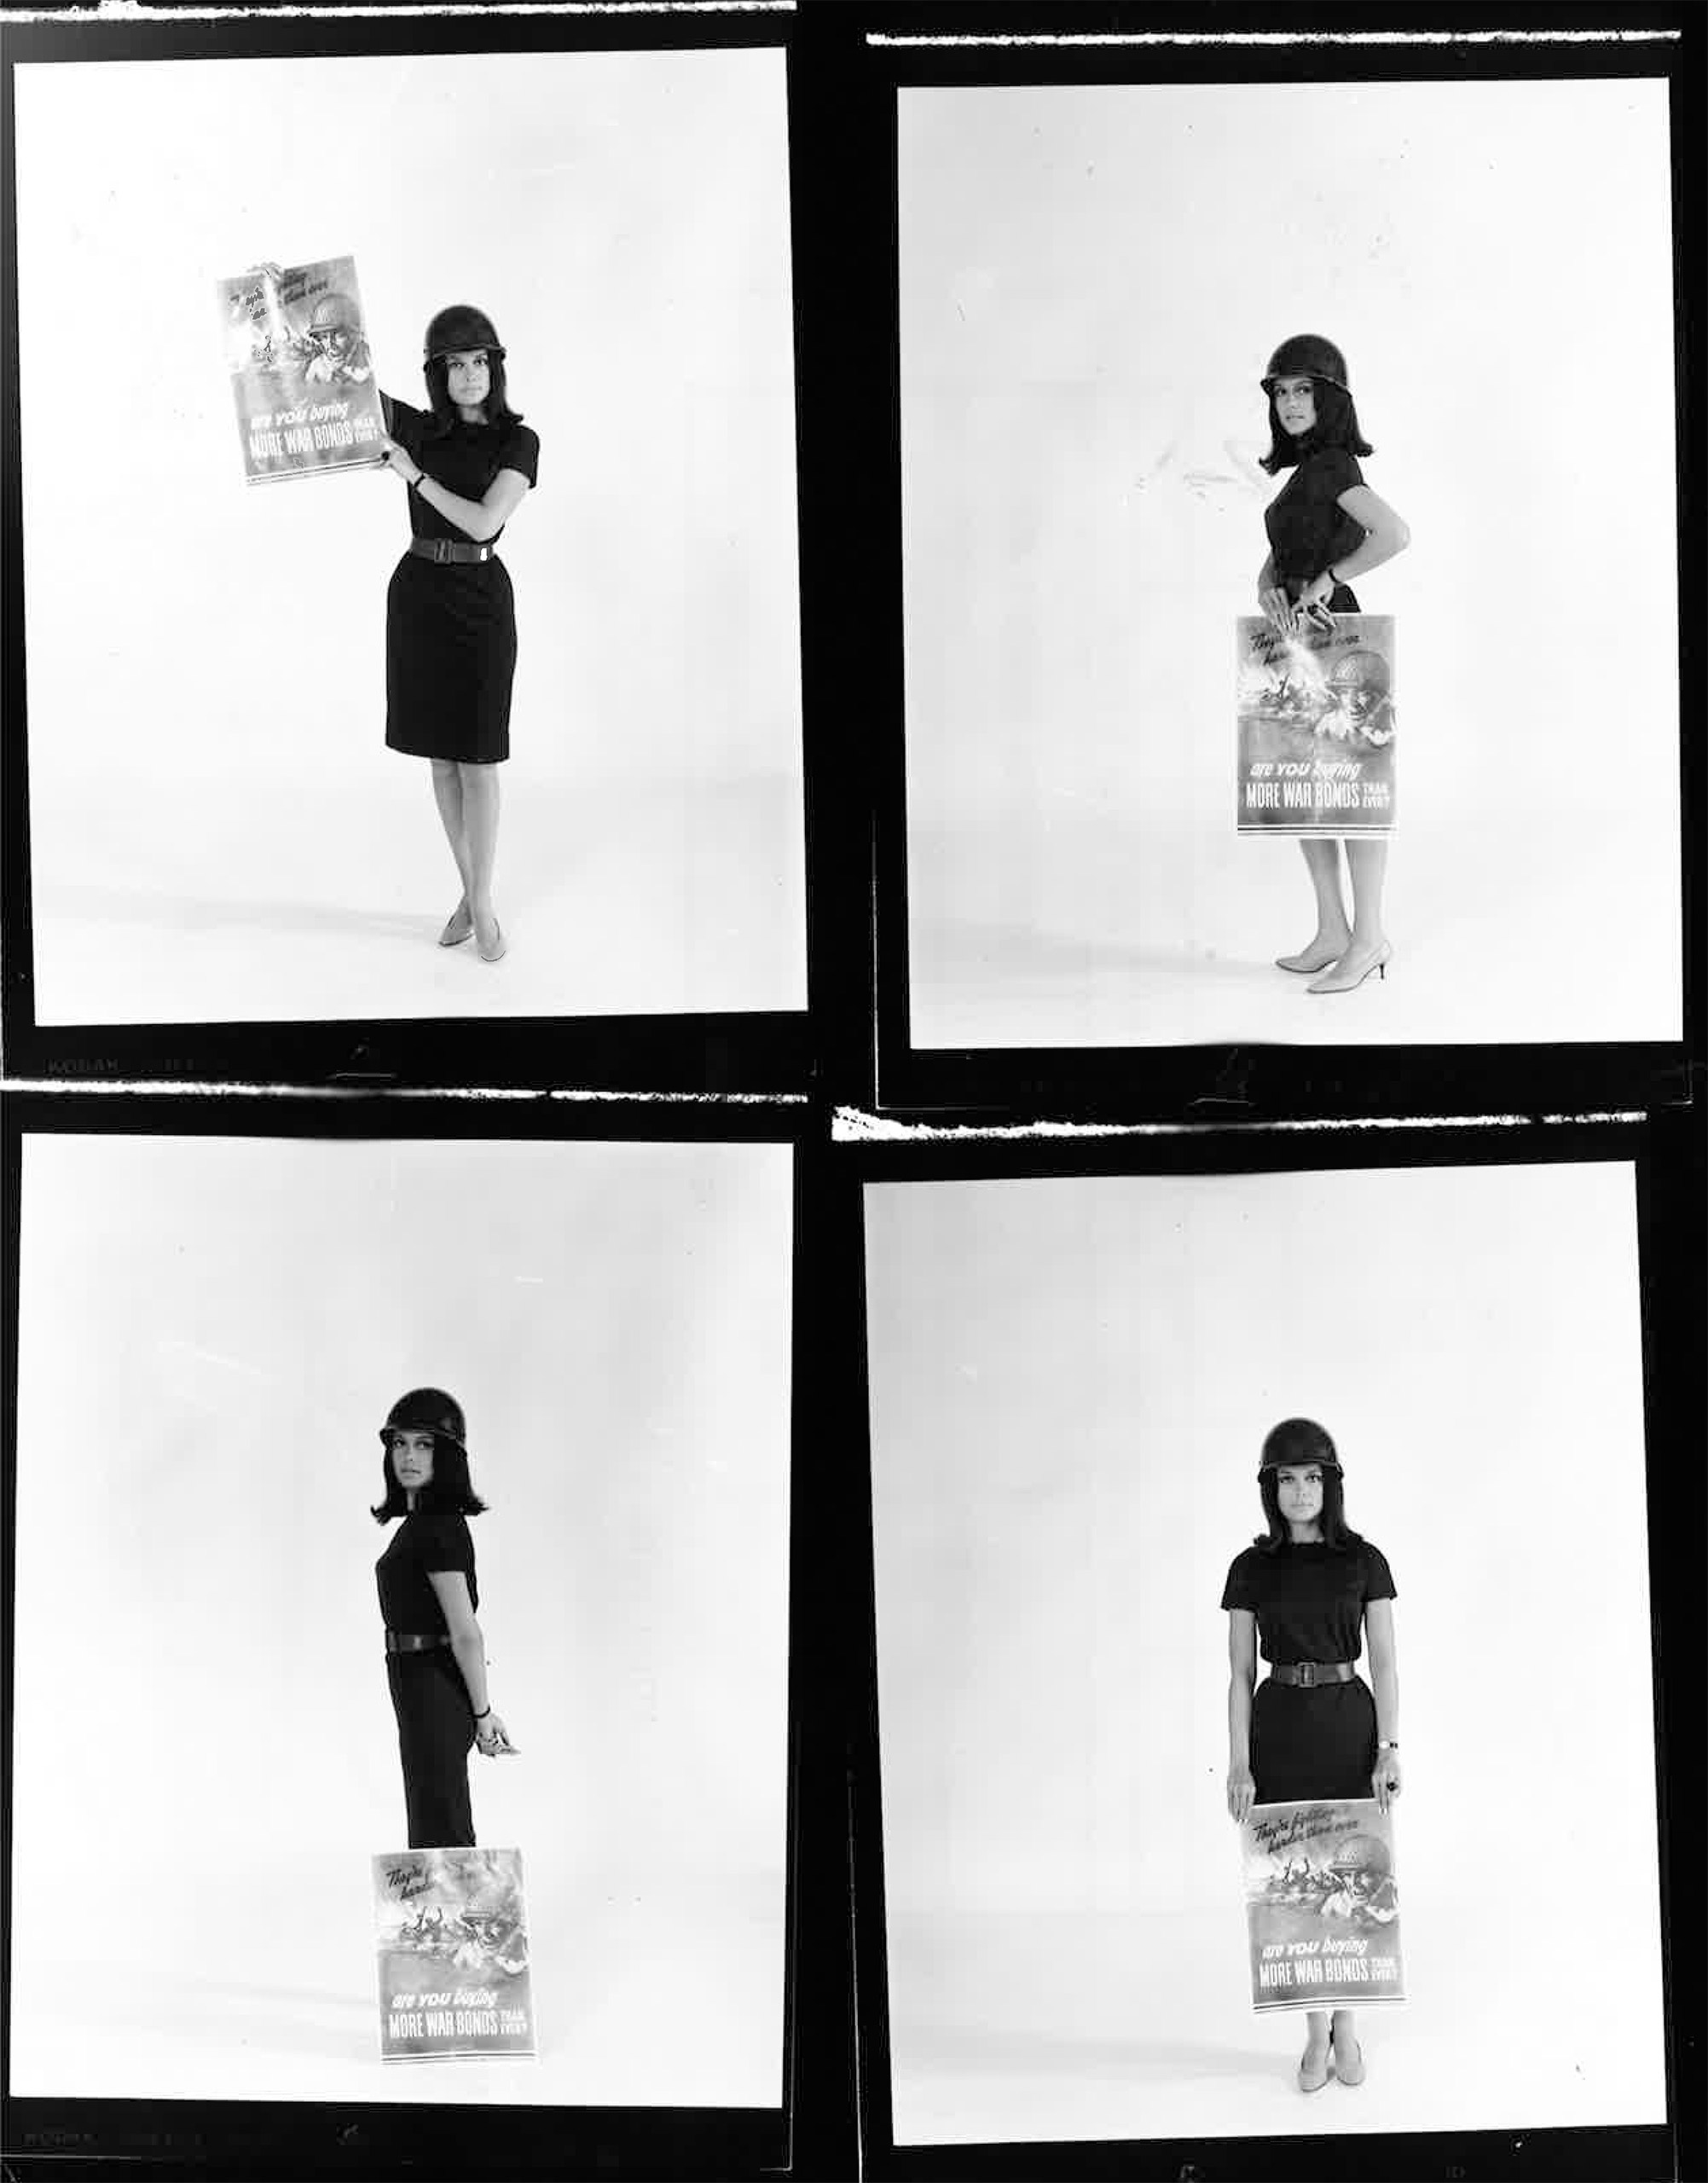 Gloria Steinem contact sheet in 1965 from LIFE magazine.